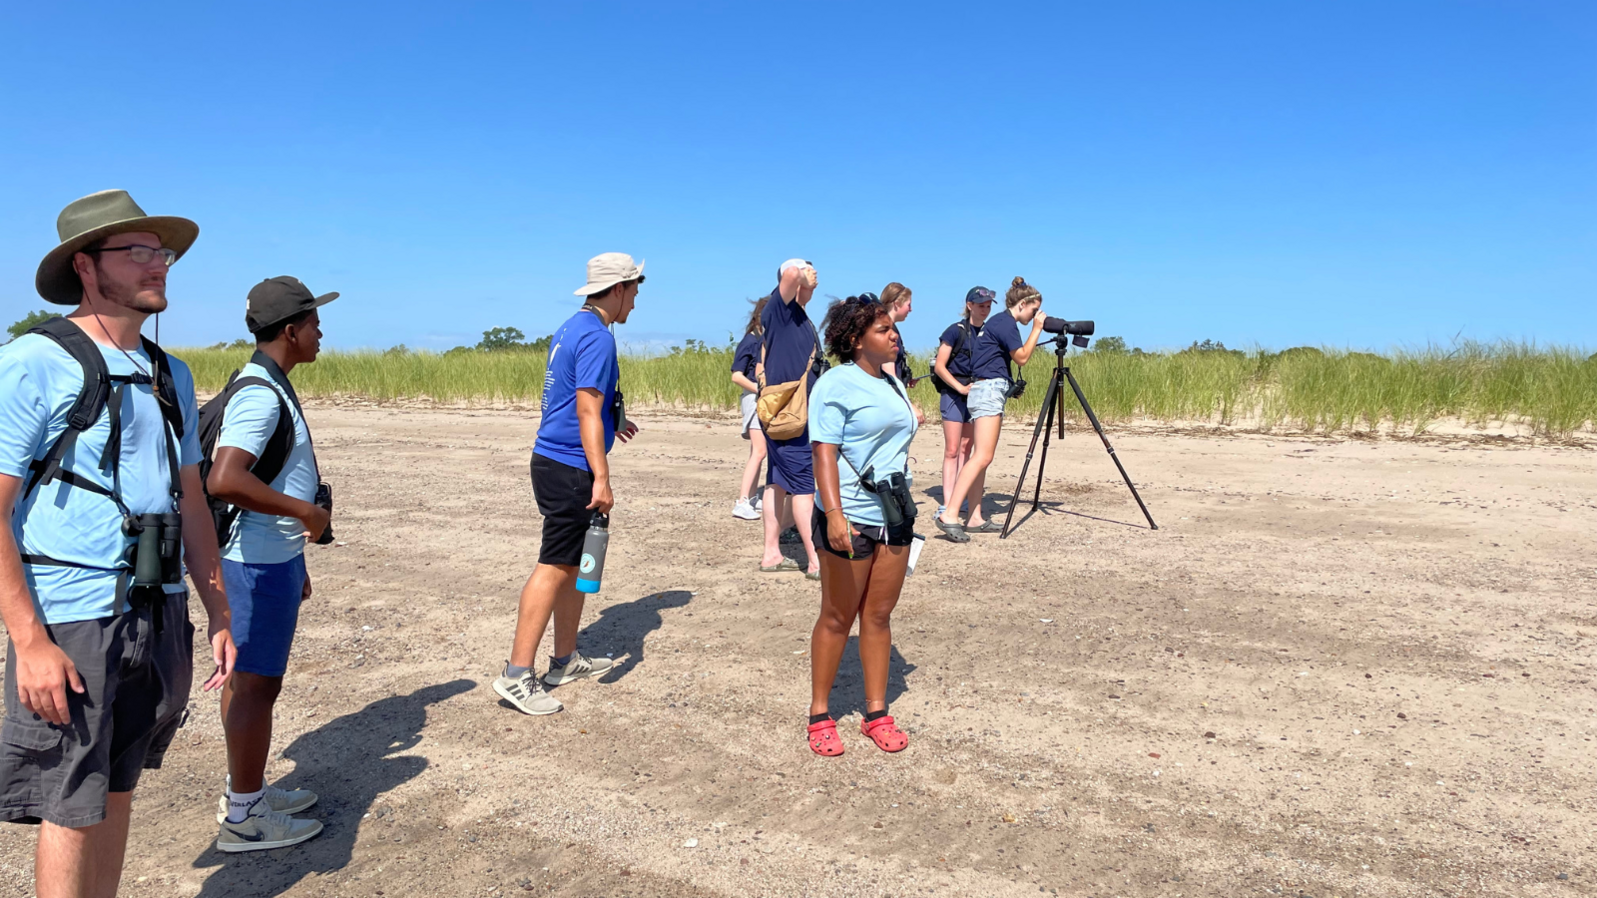 Several high school students stand on a beach, observing birds with a spotting scope.